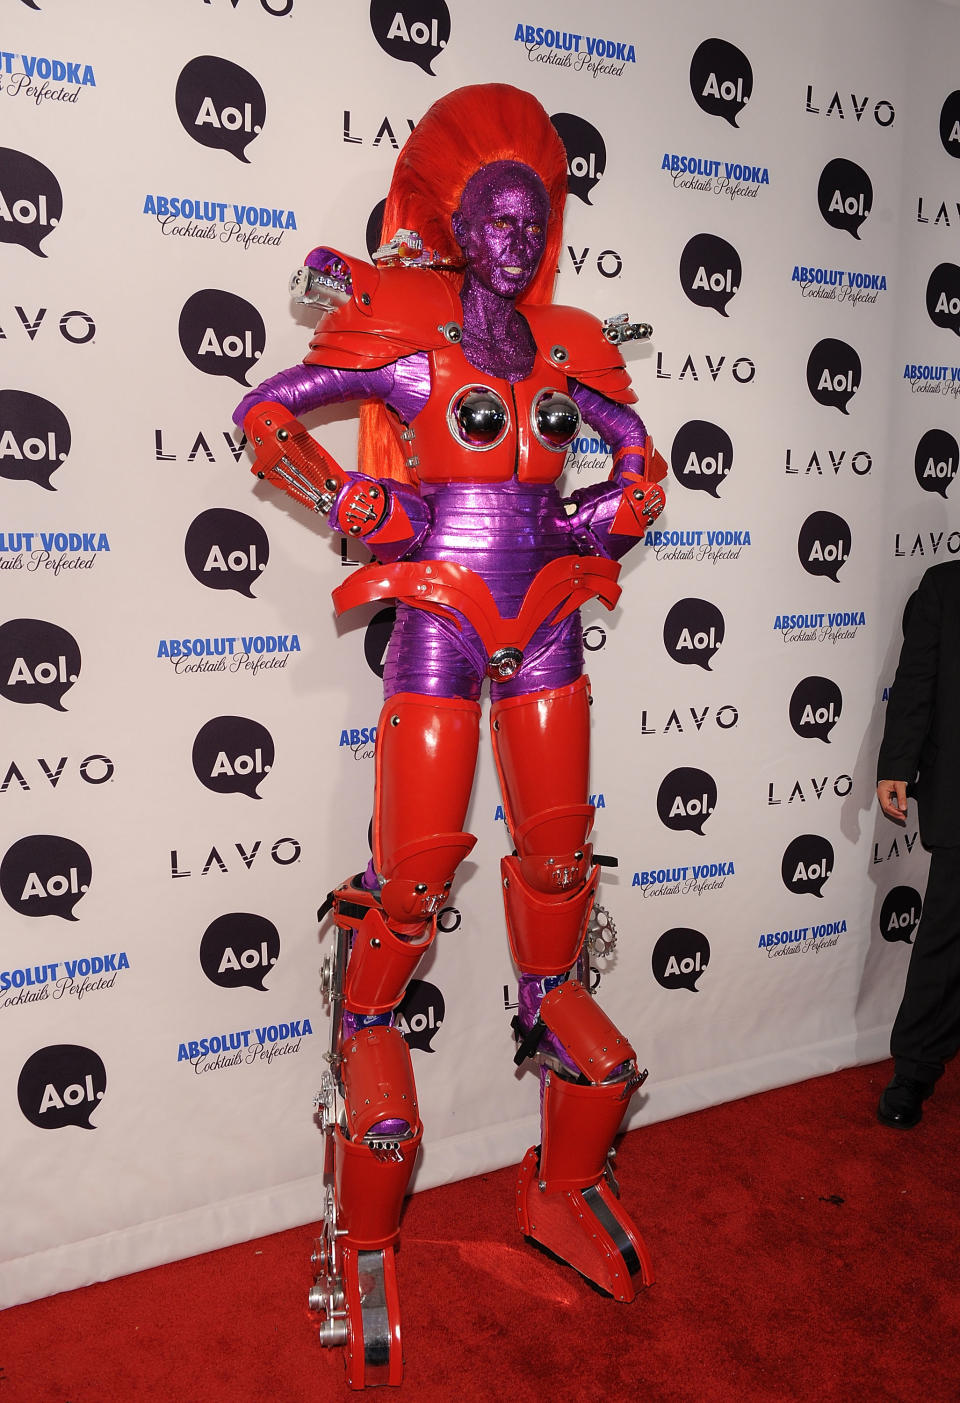 NEW YORK - OCTOBER 31:  Heidi Klum attends Heidi Klum's 2010 Halloween Party at Lavo on October 31, 2010 in New York City.  (Photo by Bryan Bedder/Getty Images)